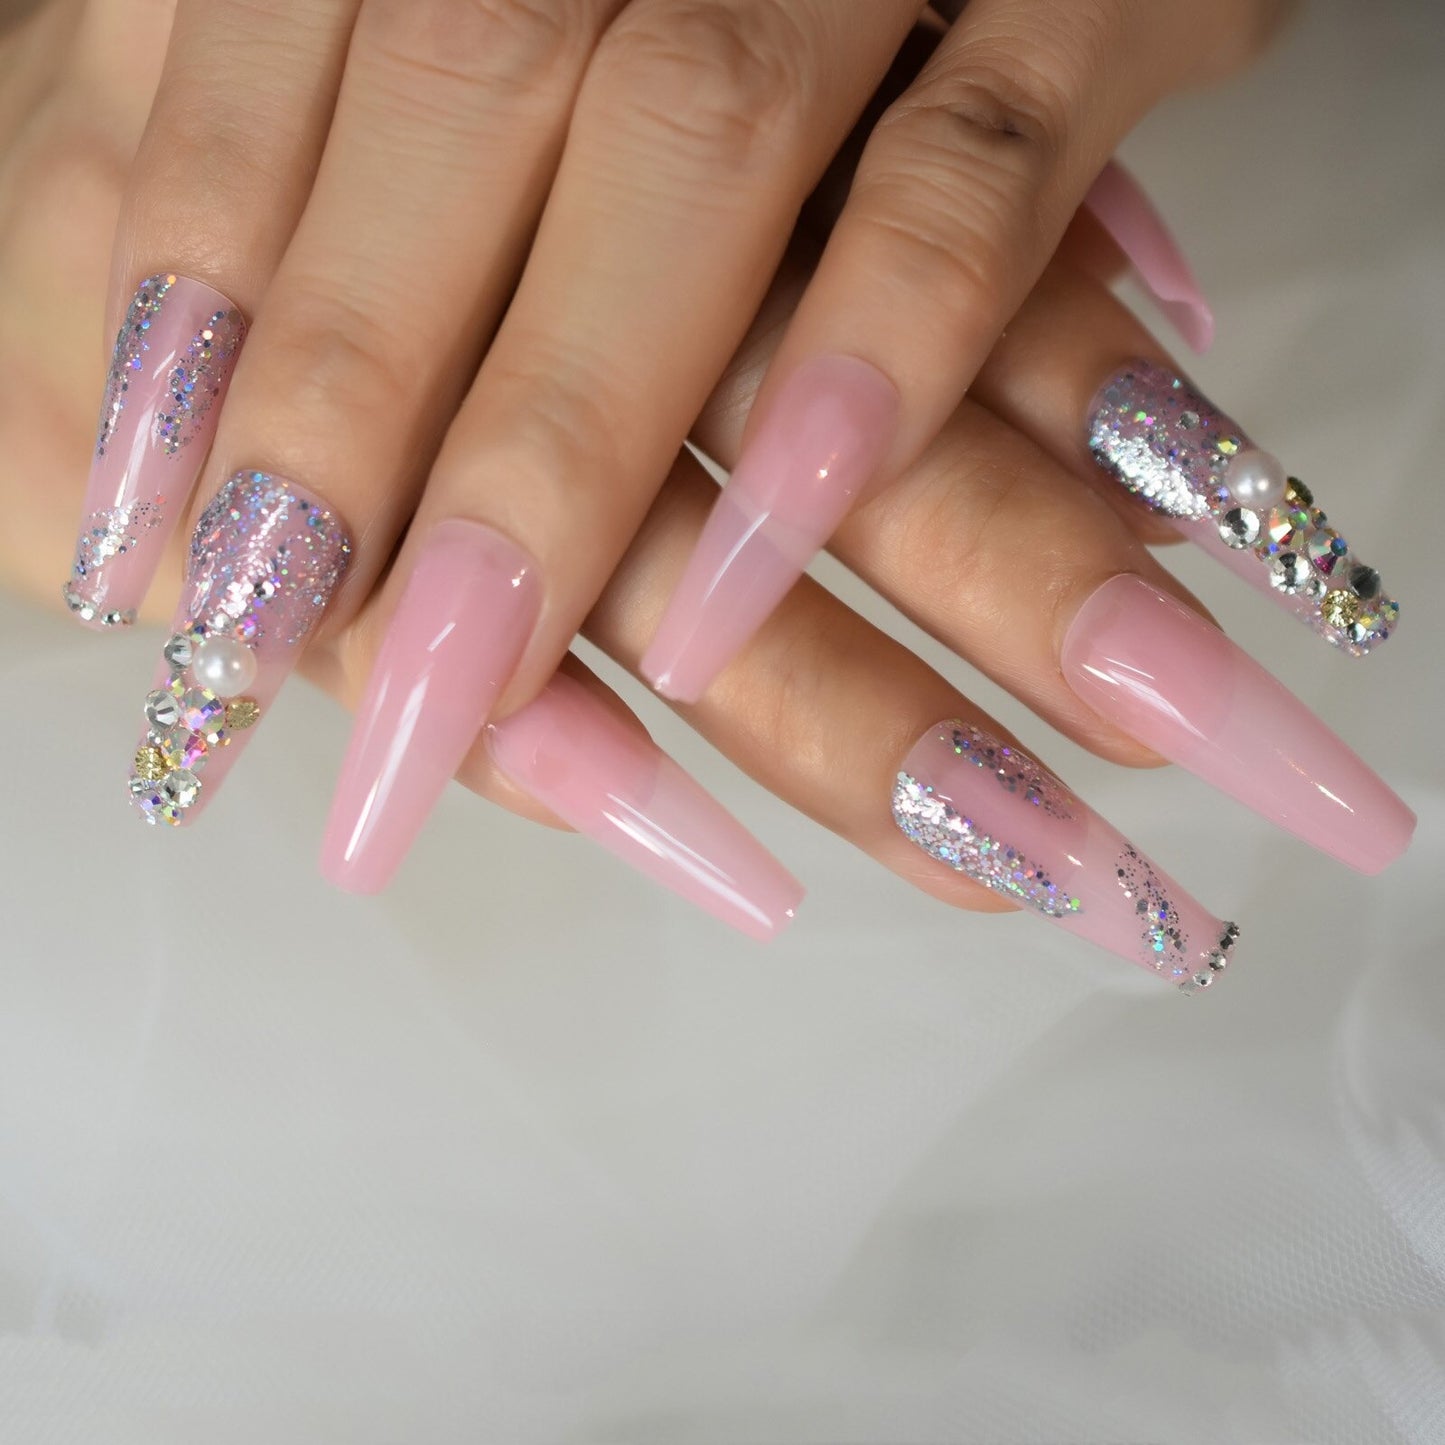 Amie Zonite Extra Long Press On Nails